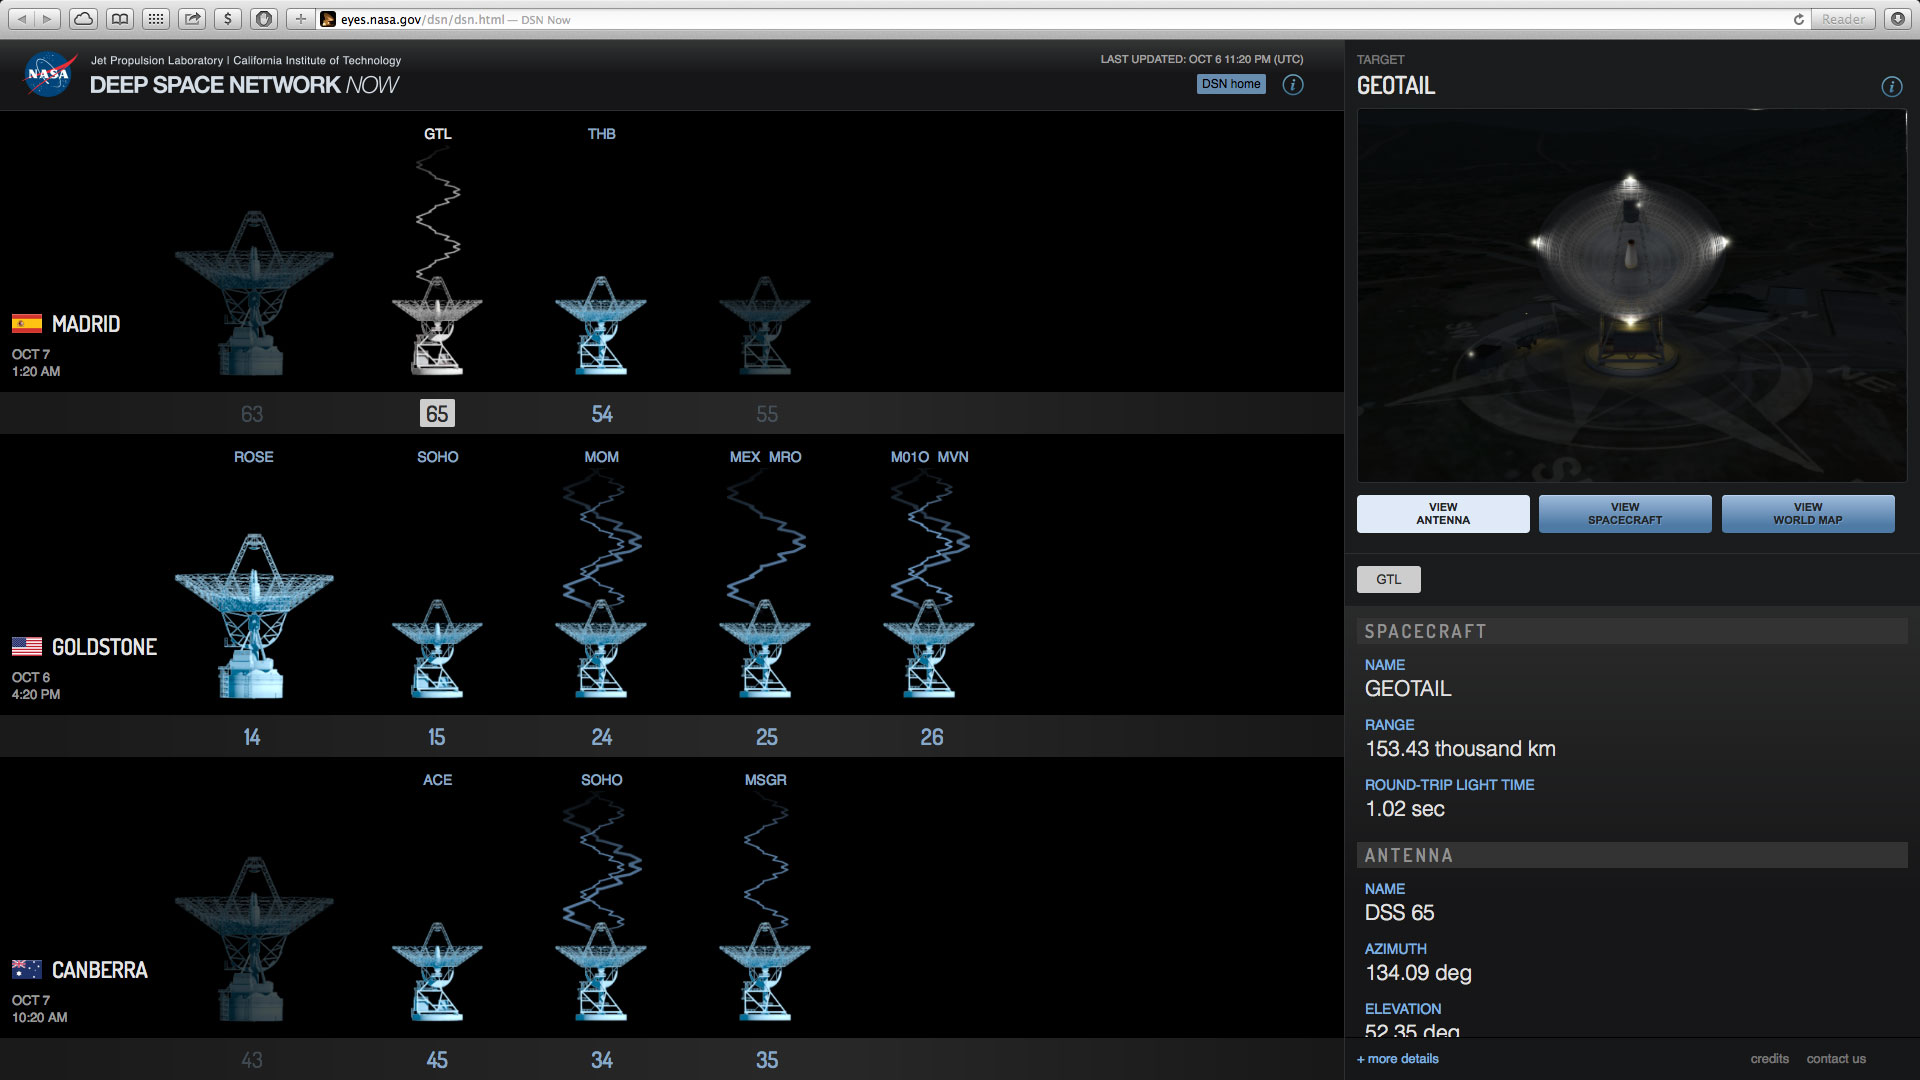 Screenshot of the activity displayed at the DSN Now website.